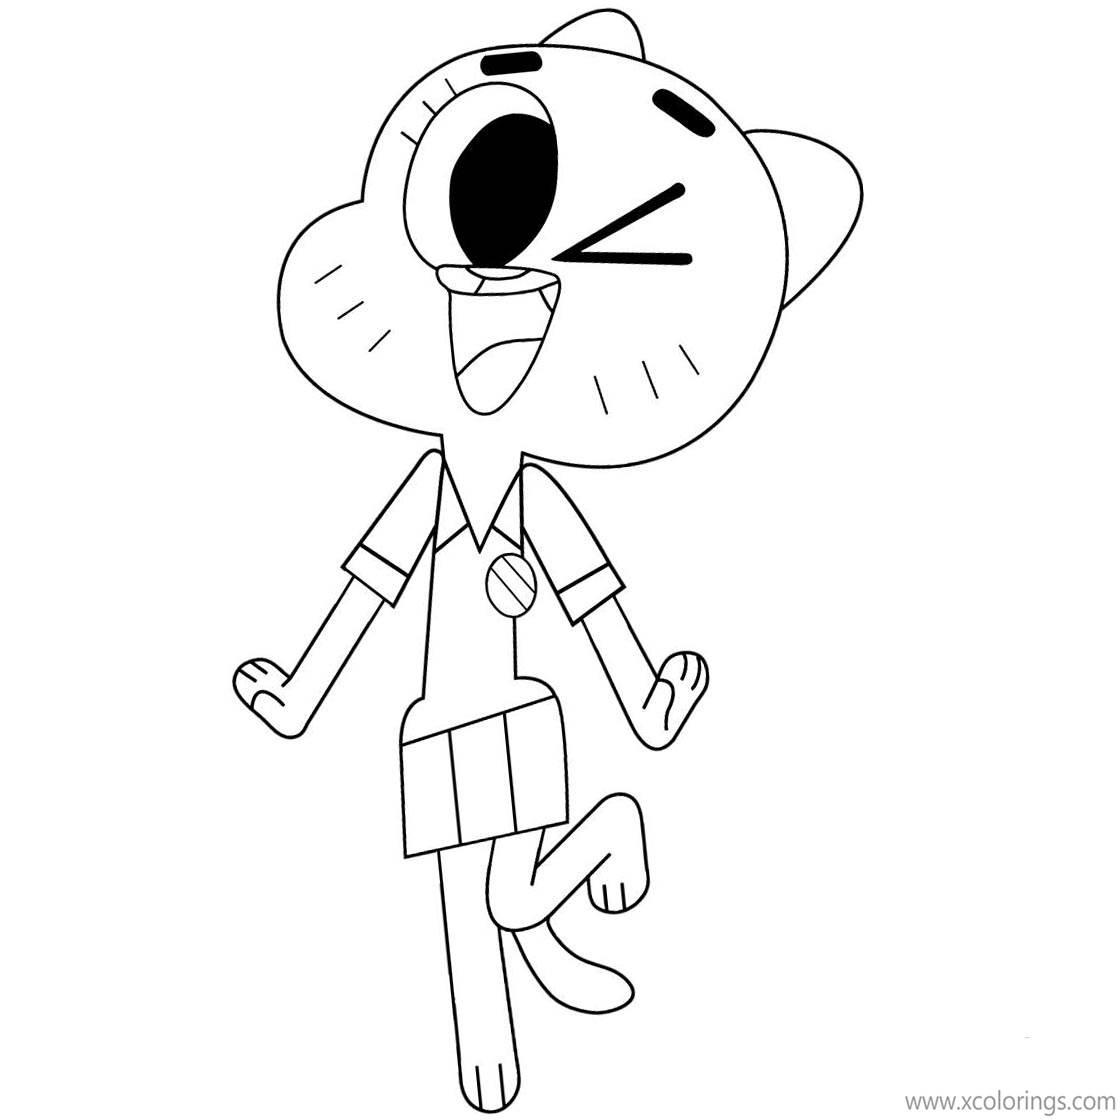 Free The Amazing World of Gumball Coloring Pages Mom Nicole is Dancing printable